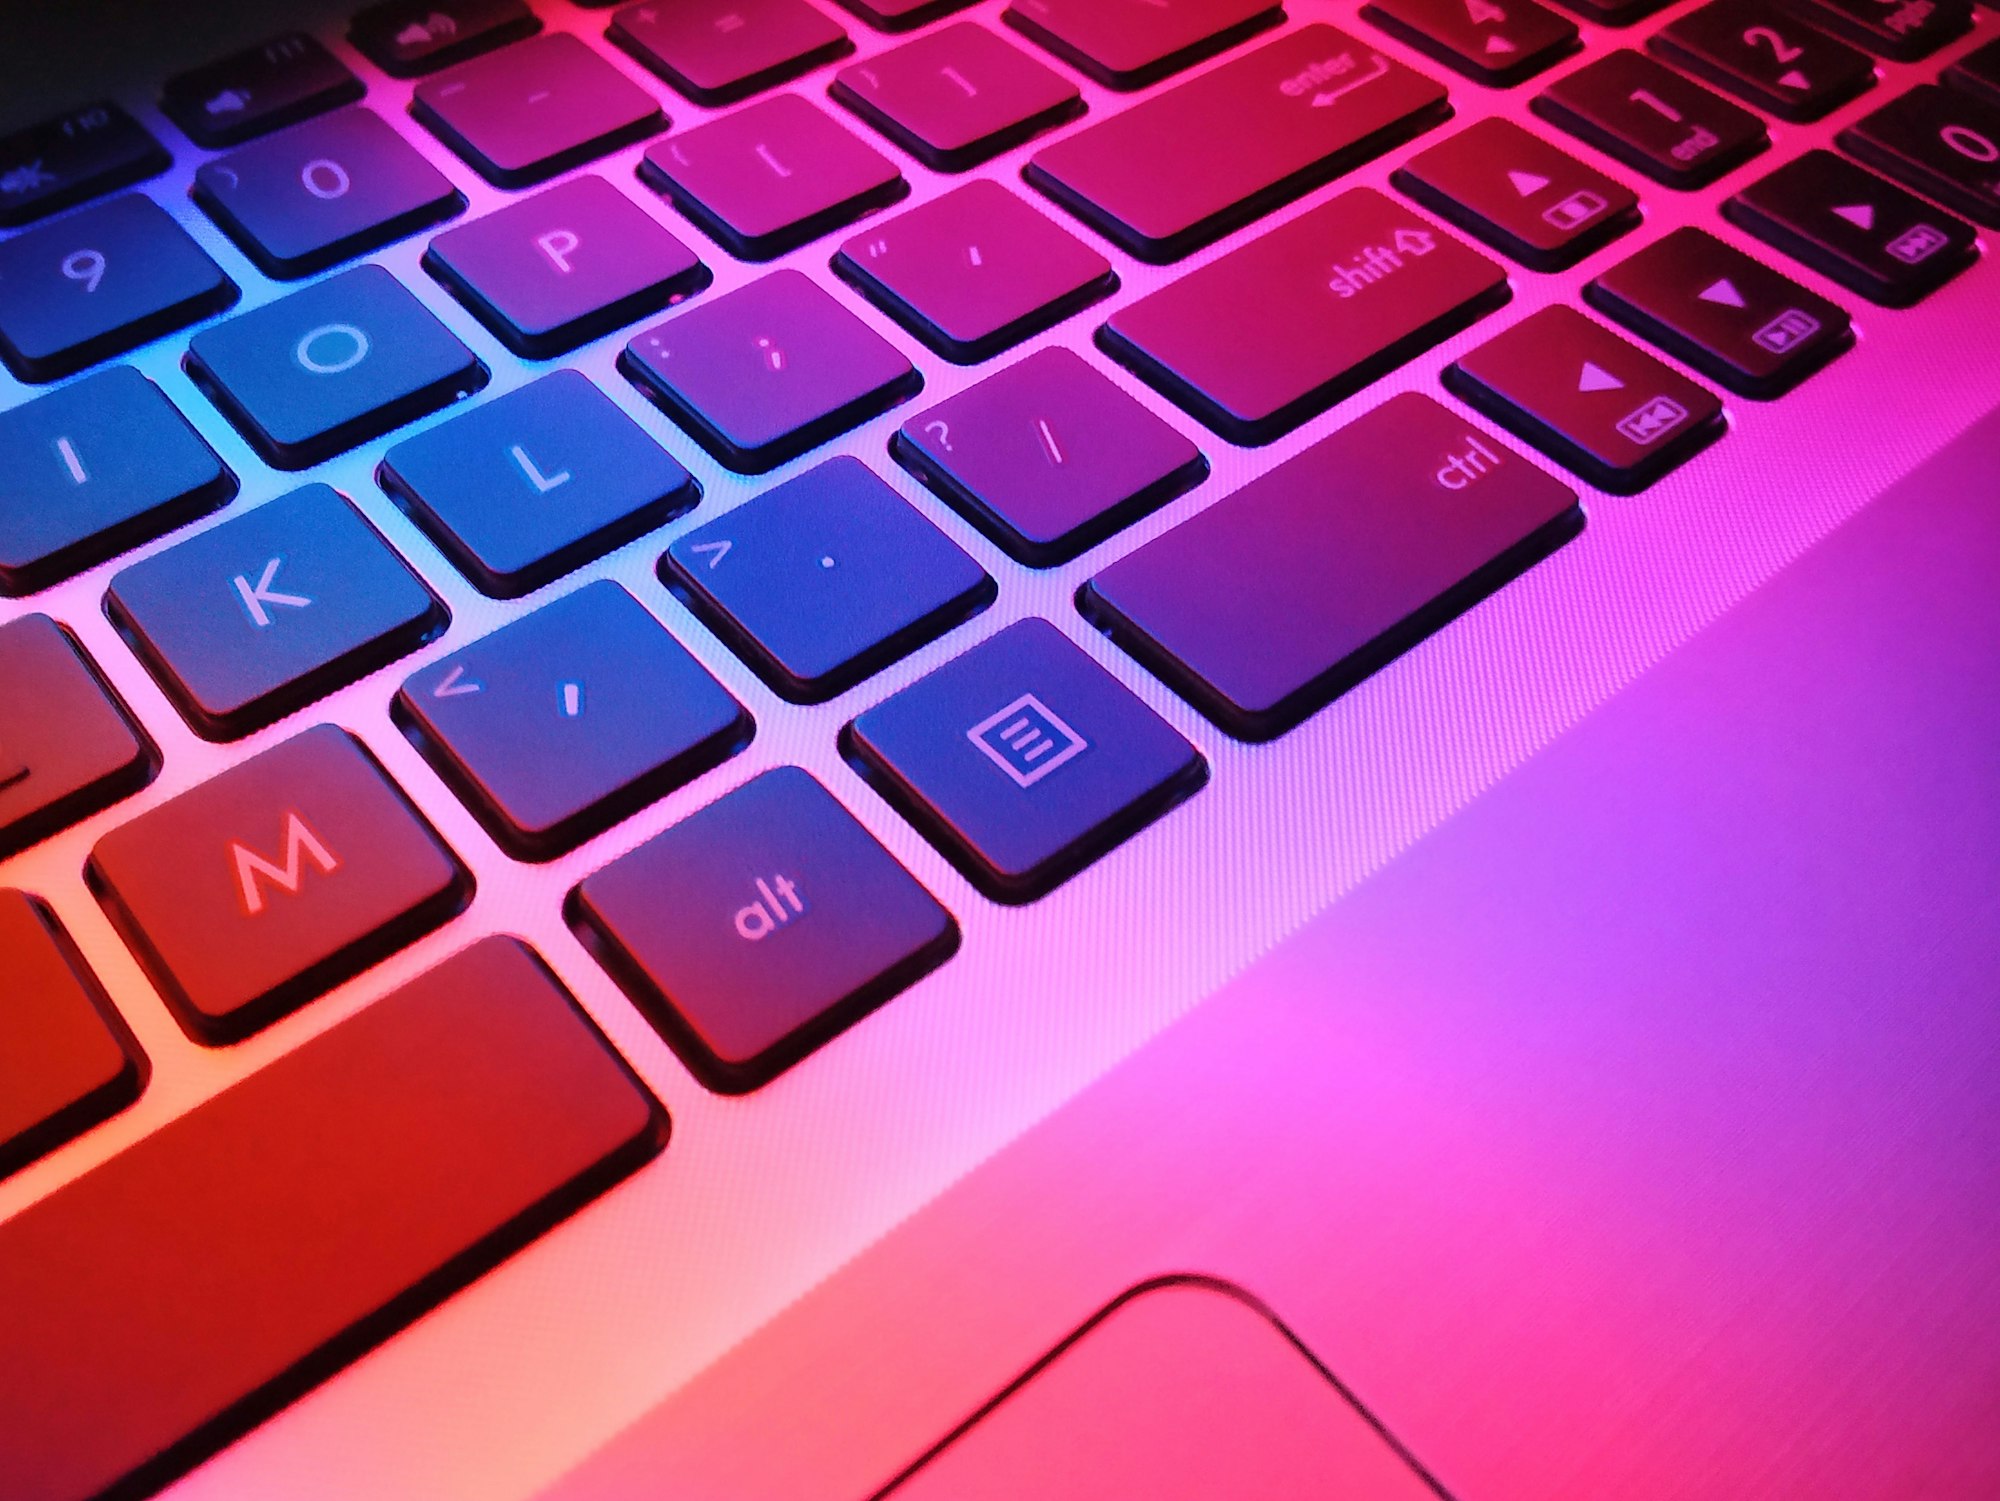 These keyboard shortcuts will recover closed browser tabs on your PC